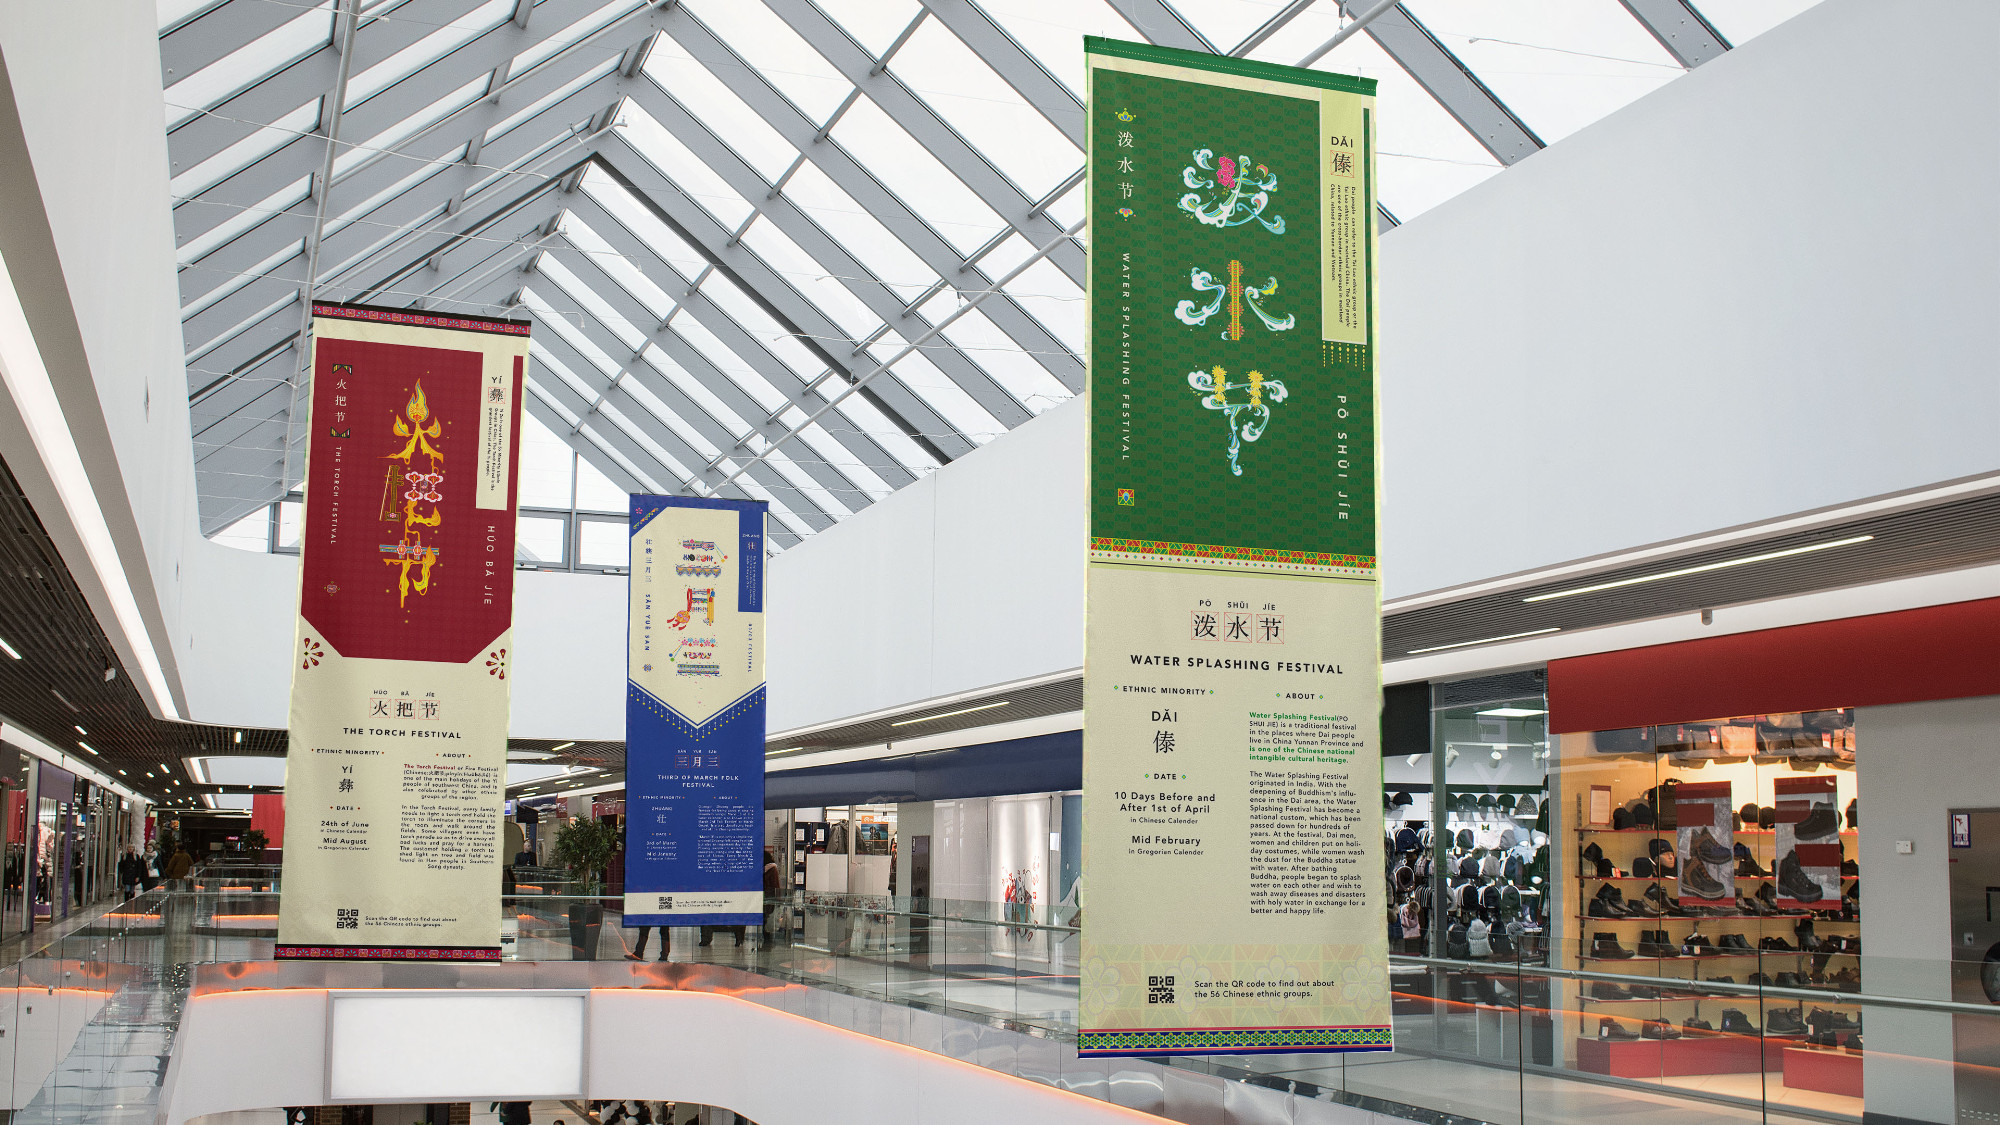 Chinese Banner Designs for the Yi, Zhuang and Dai Ethnic Groups’ Grand Festivals